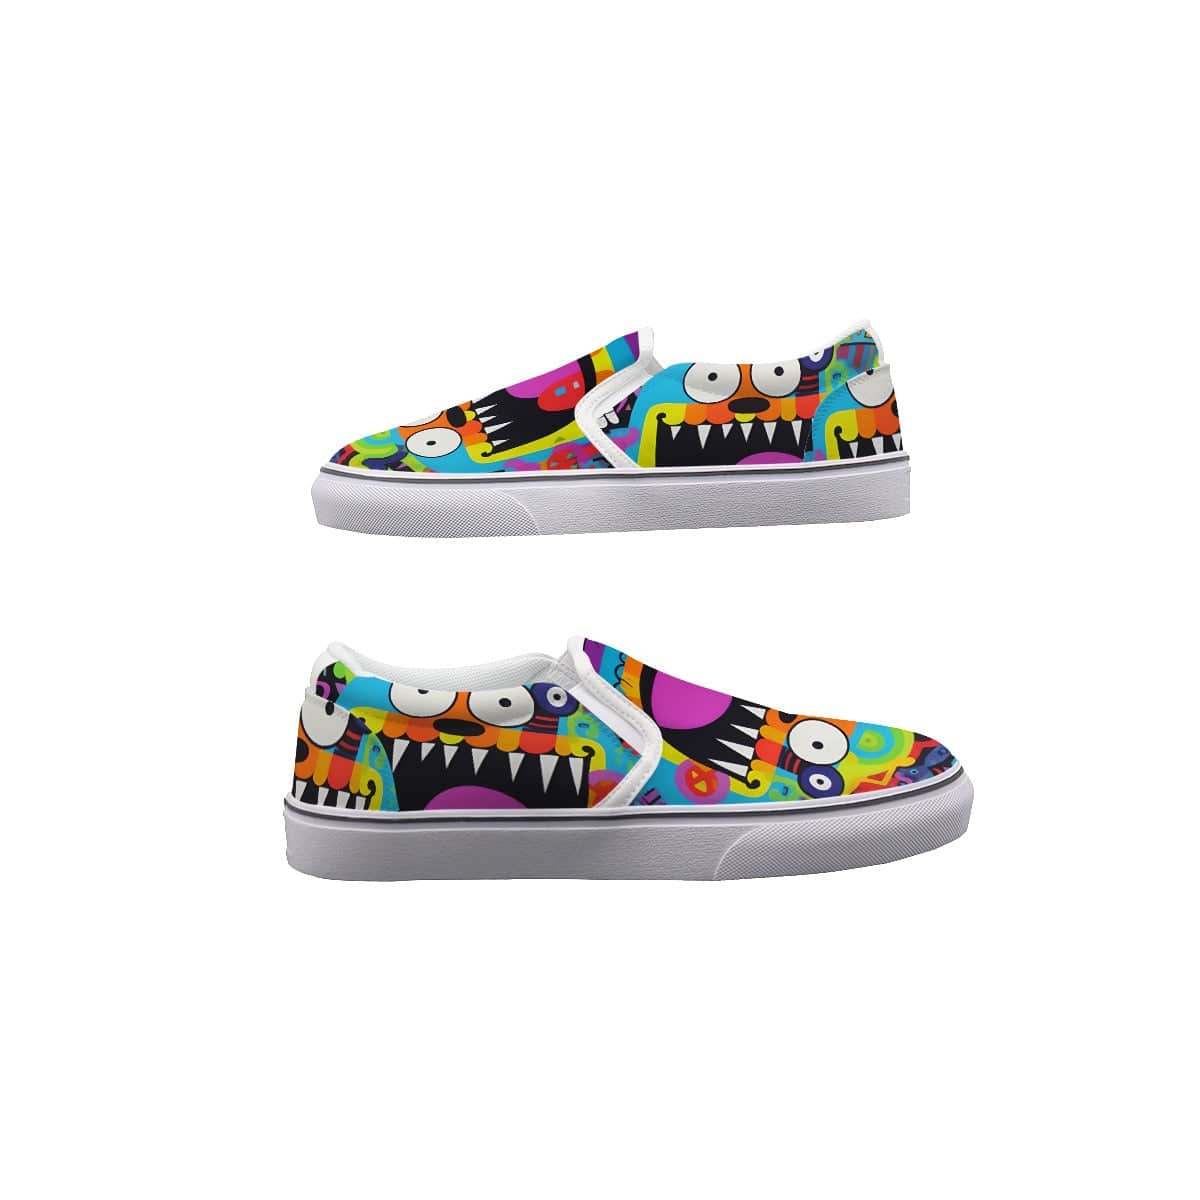 Yoycol Abstract Amigos - Women's Slip On Sneakers